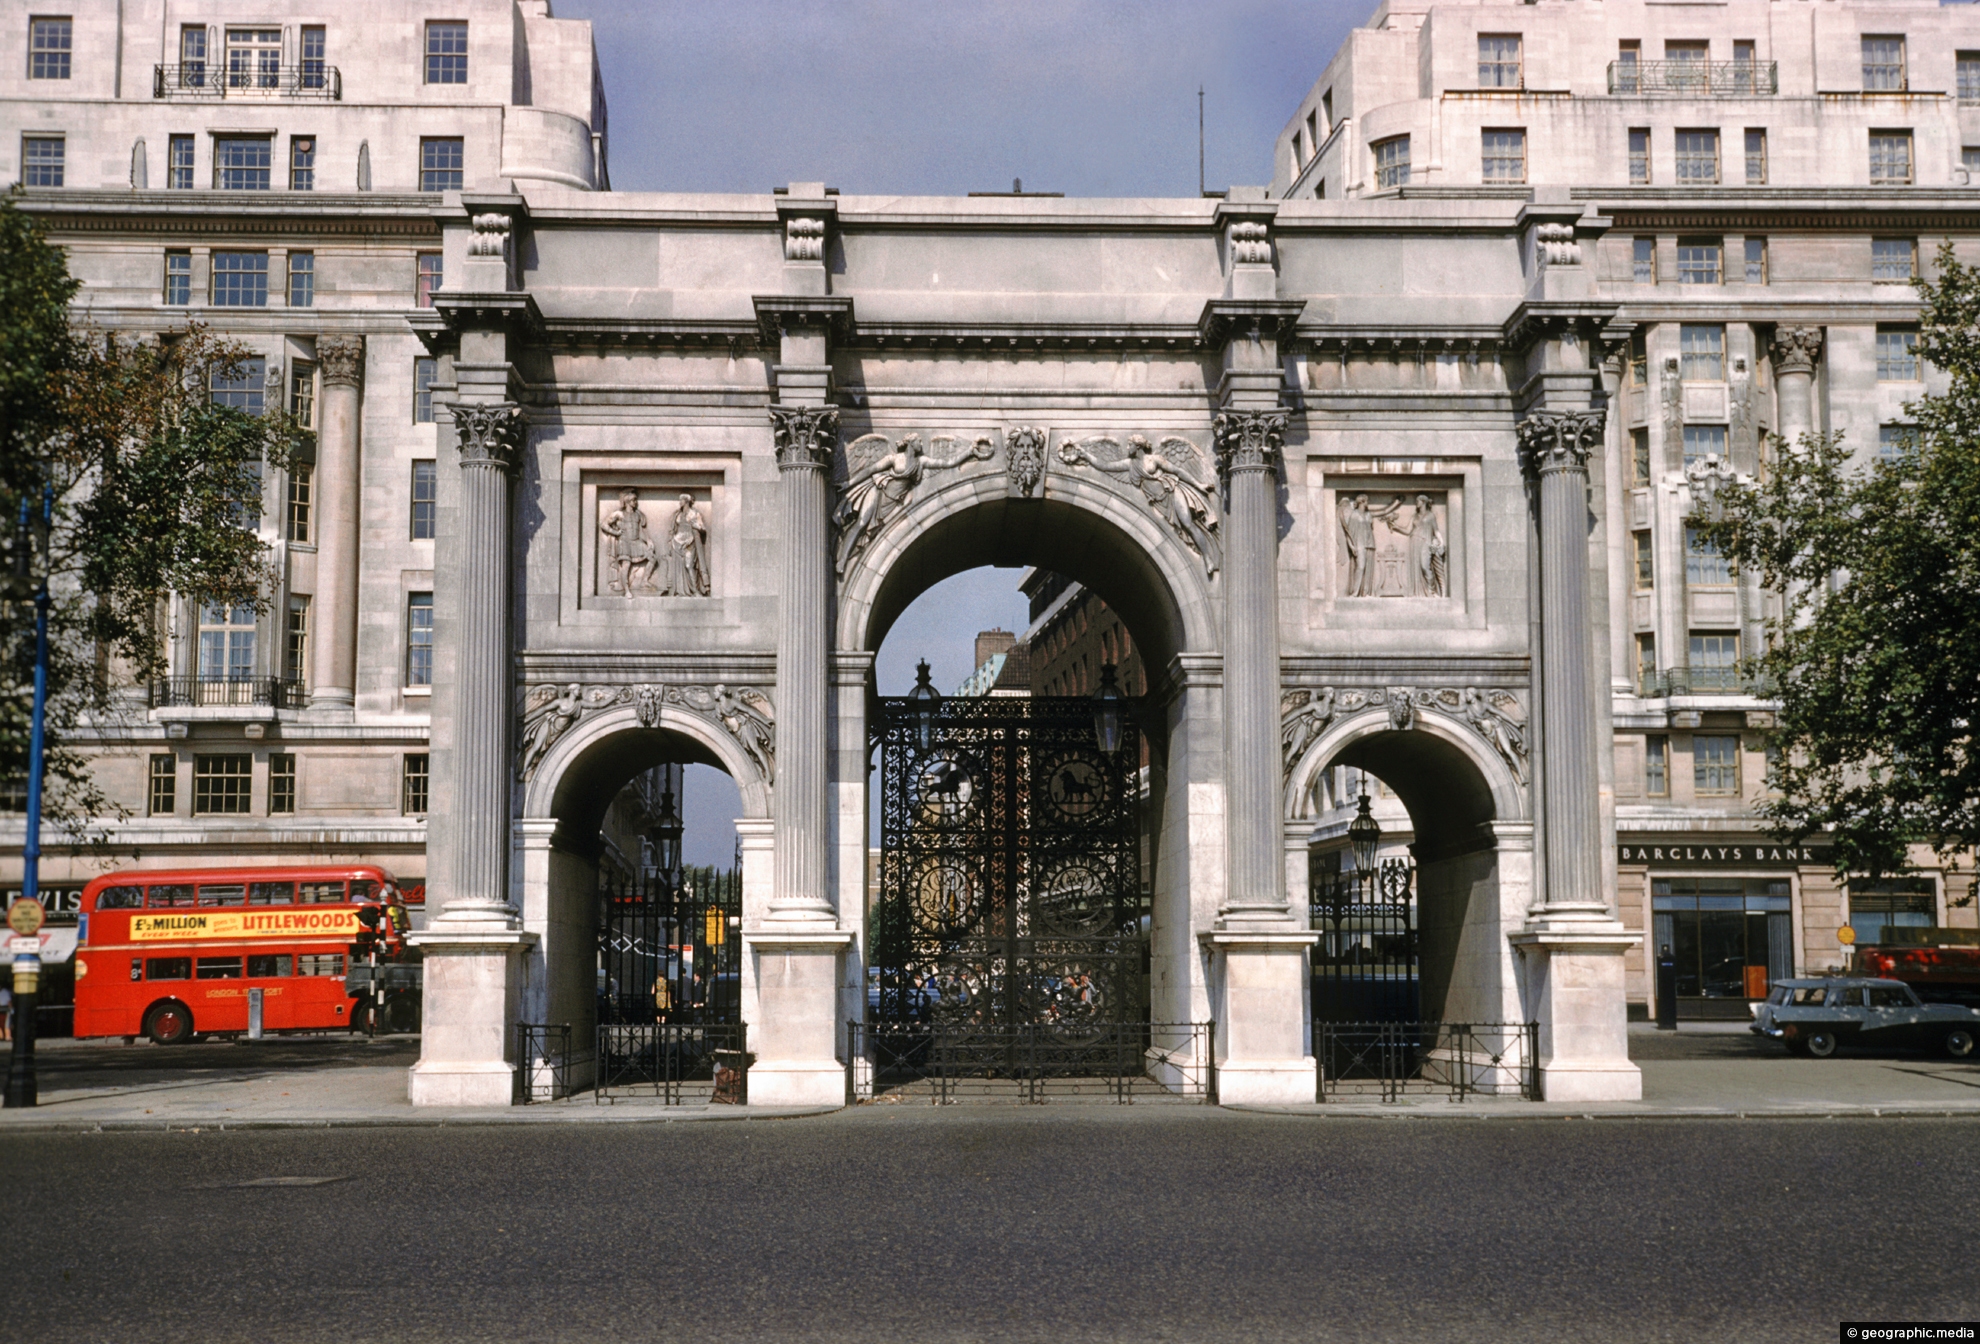 Marble Arch in London England